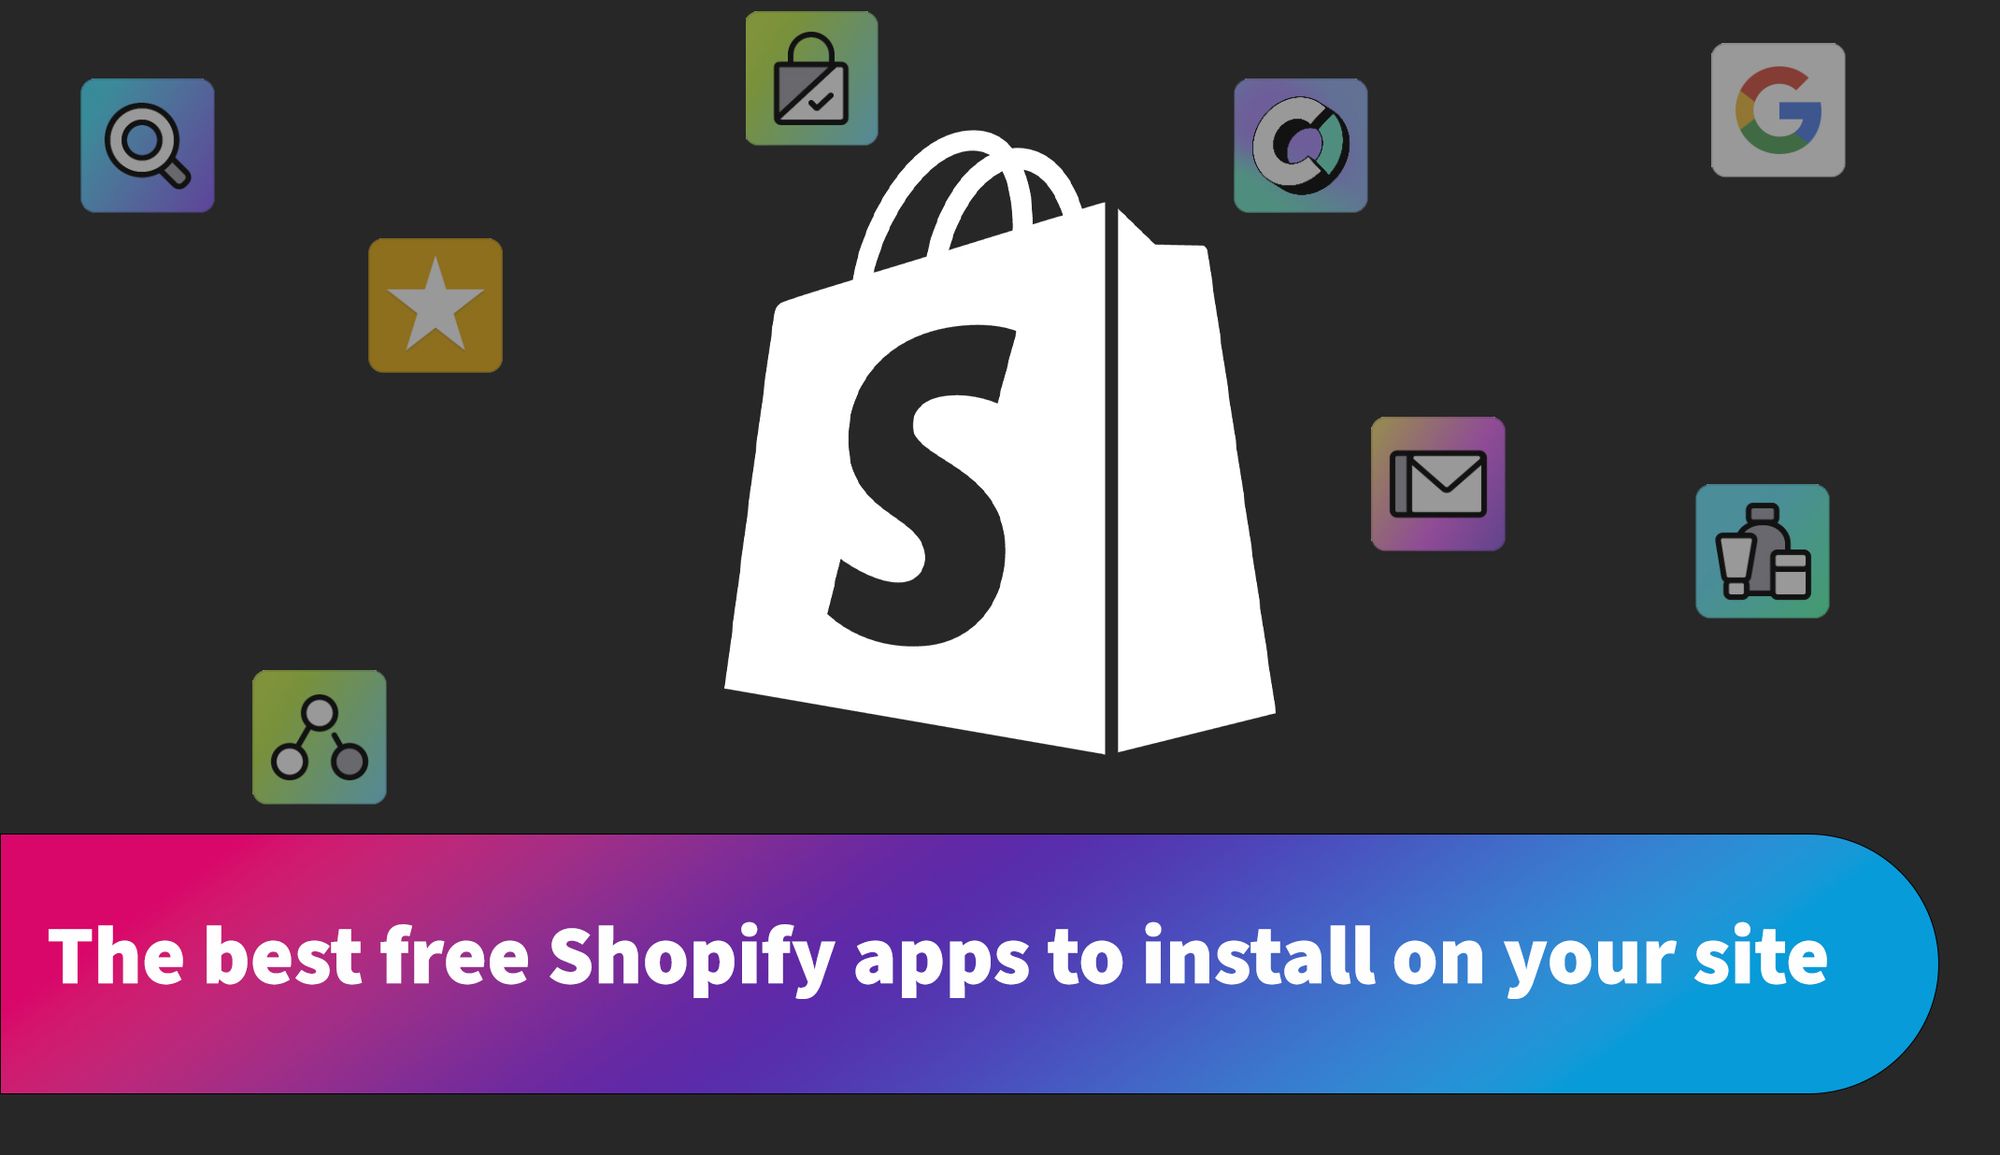 The best free Shopify apps to install on your site